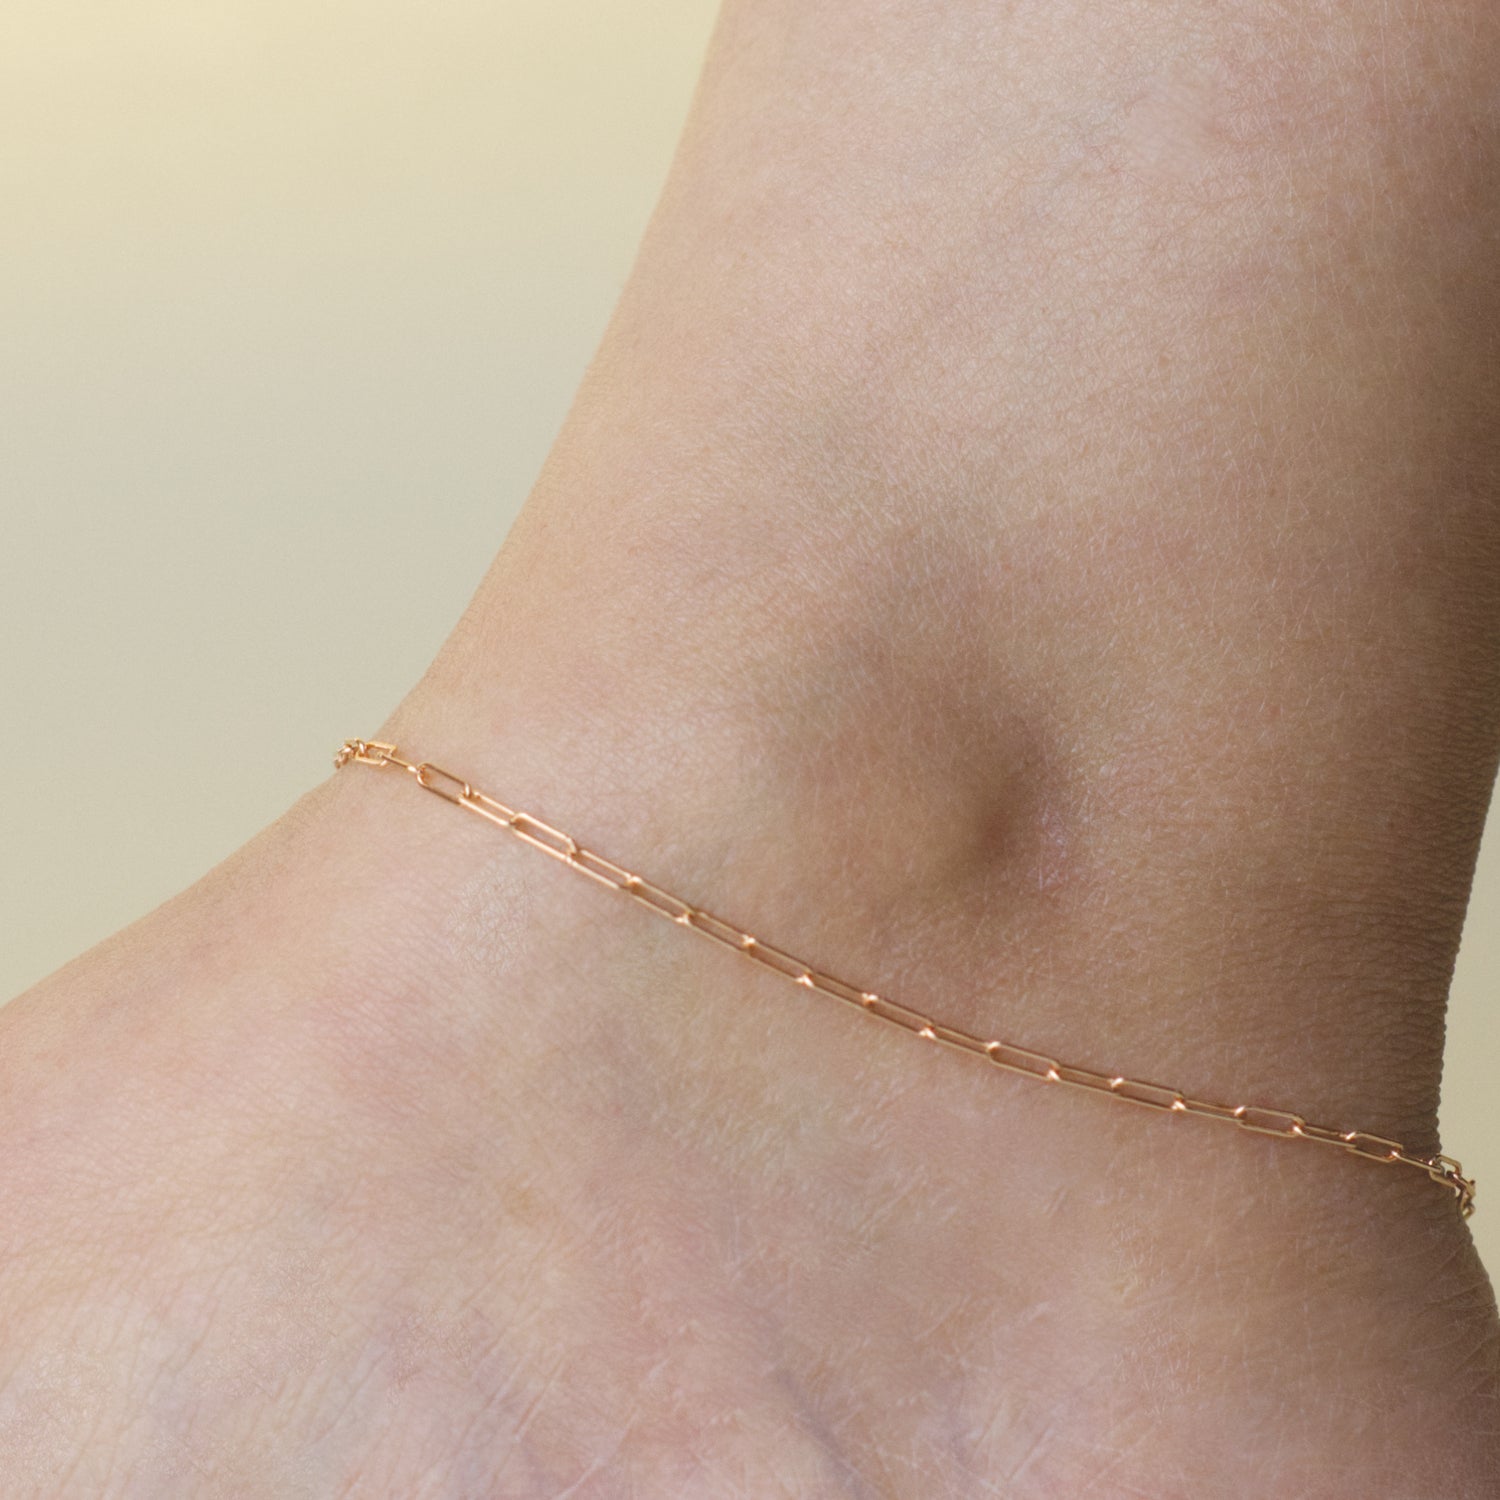 Woman wearing a 14K rose gold fill paperclip chain anklet with a minimalist style (small) link size